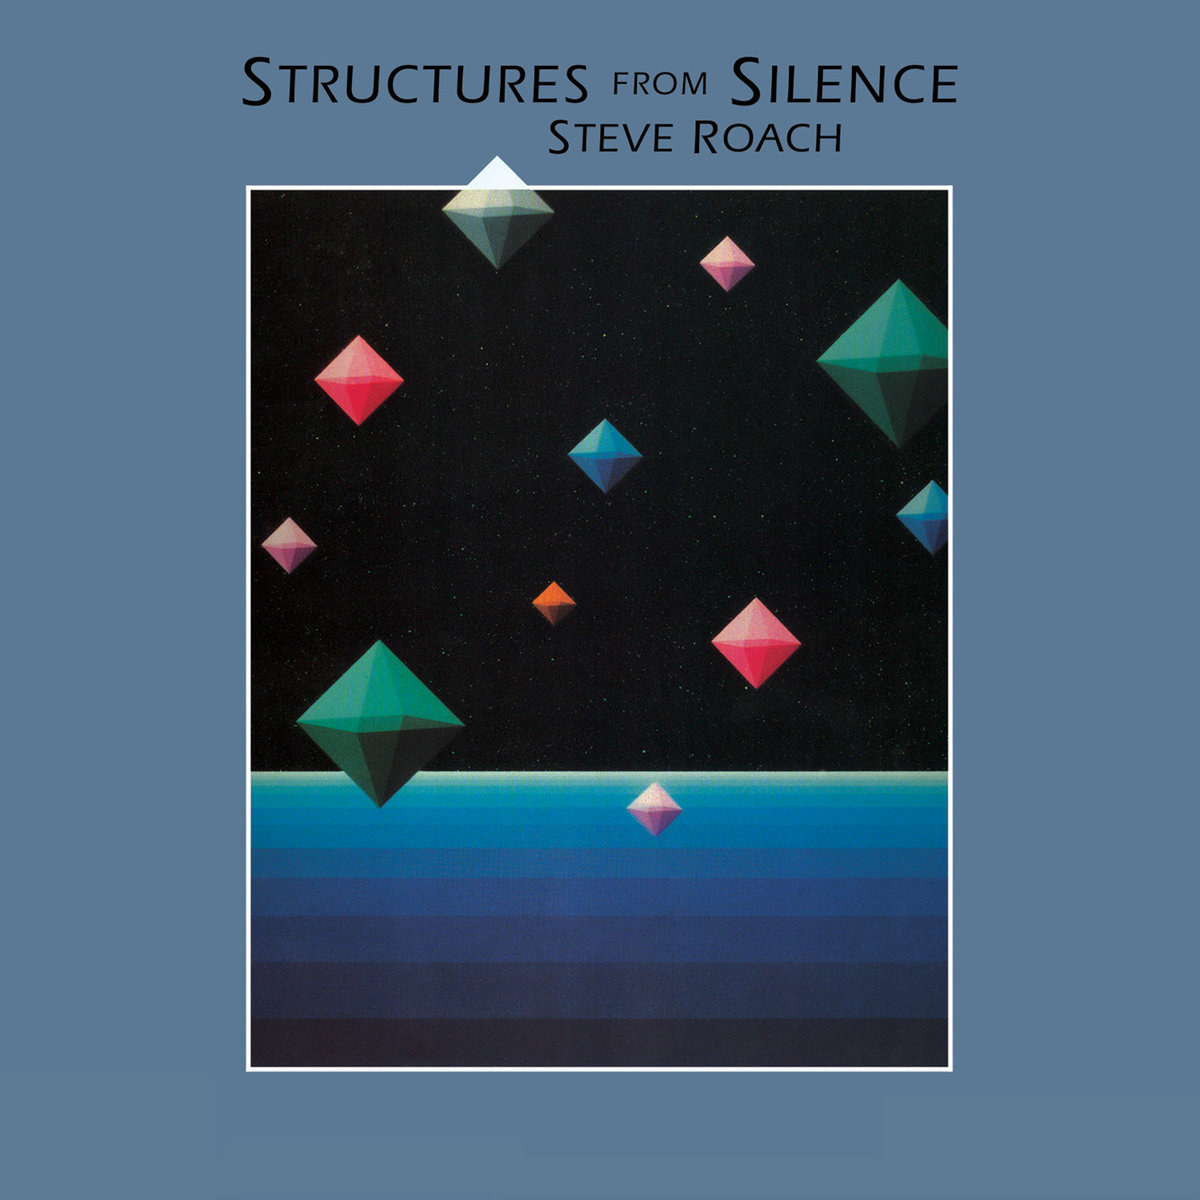 Distro Item / Steve Roach "Structures From Silence" LP Reissue |  Flannelgraph Records